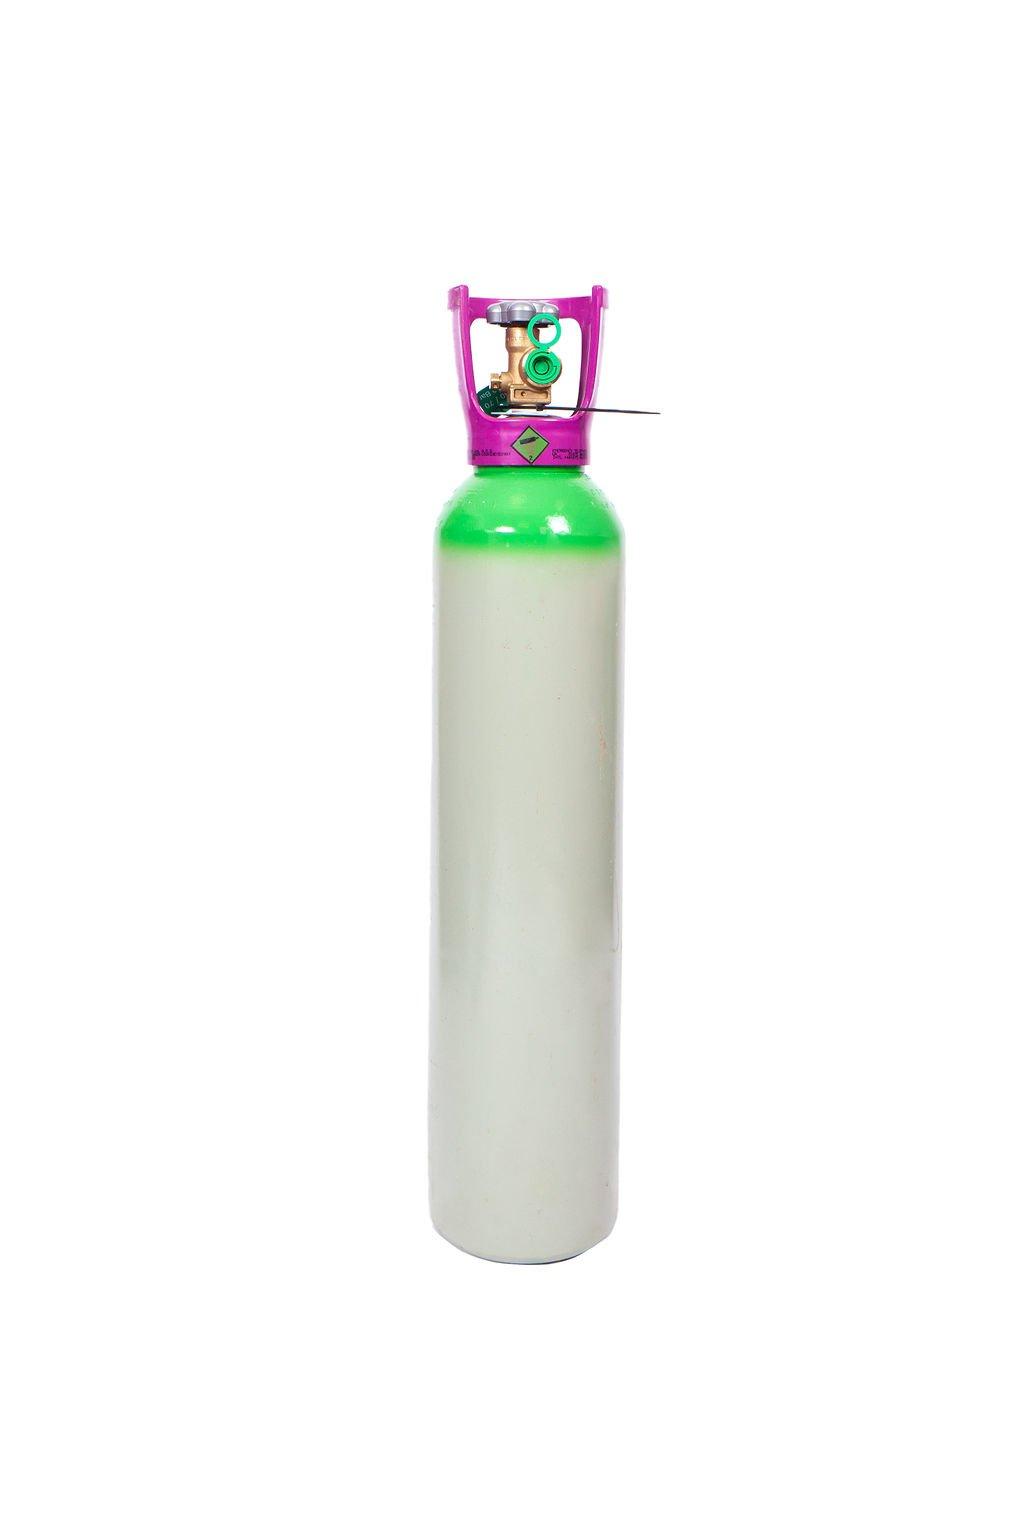 Product Air Liquide Beverage 60/40 L10 180 Bar Gas Bottle | Innergy image